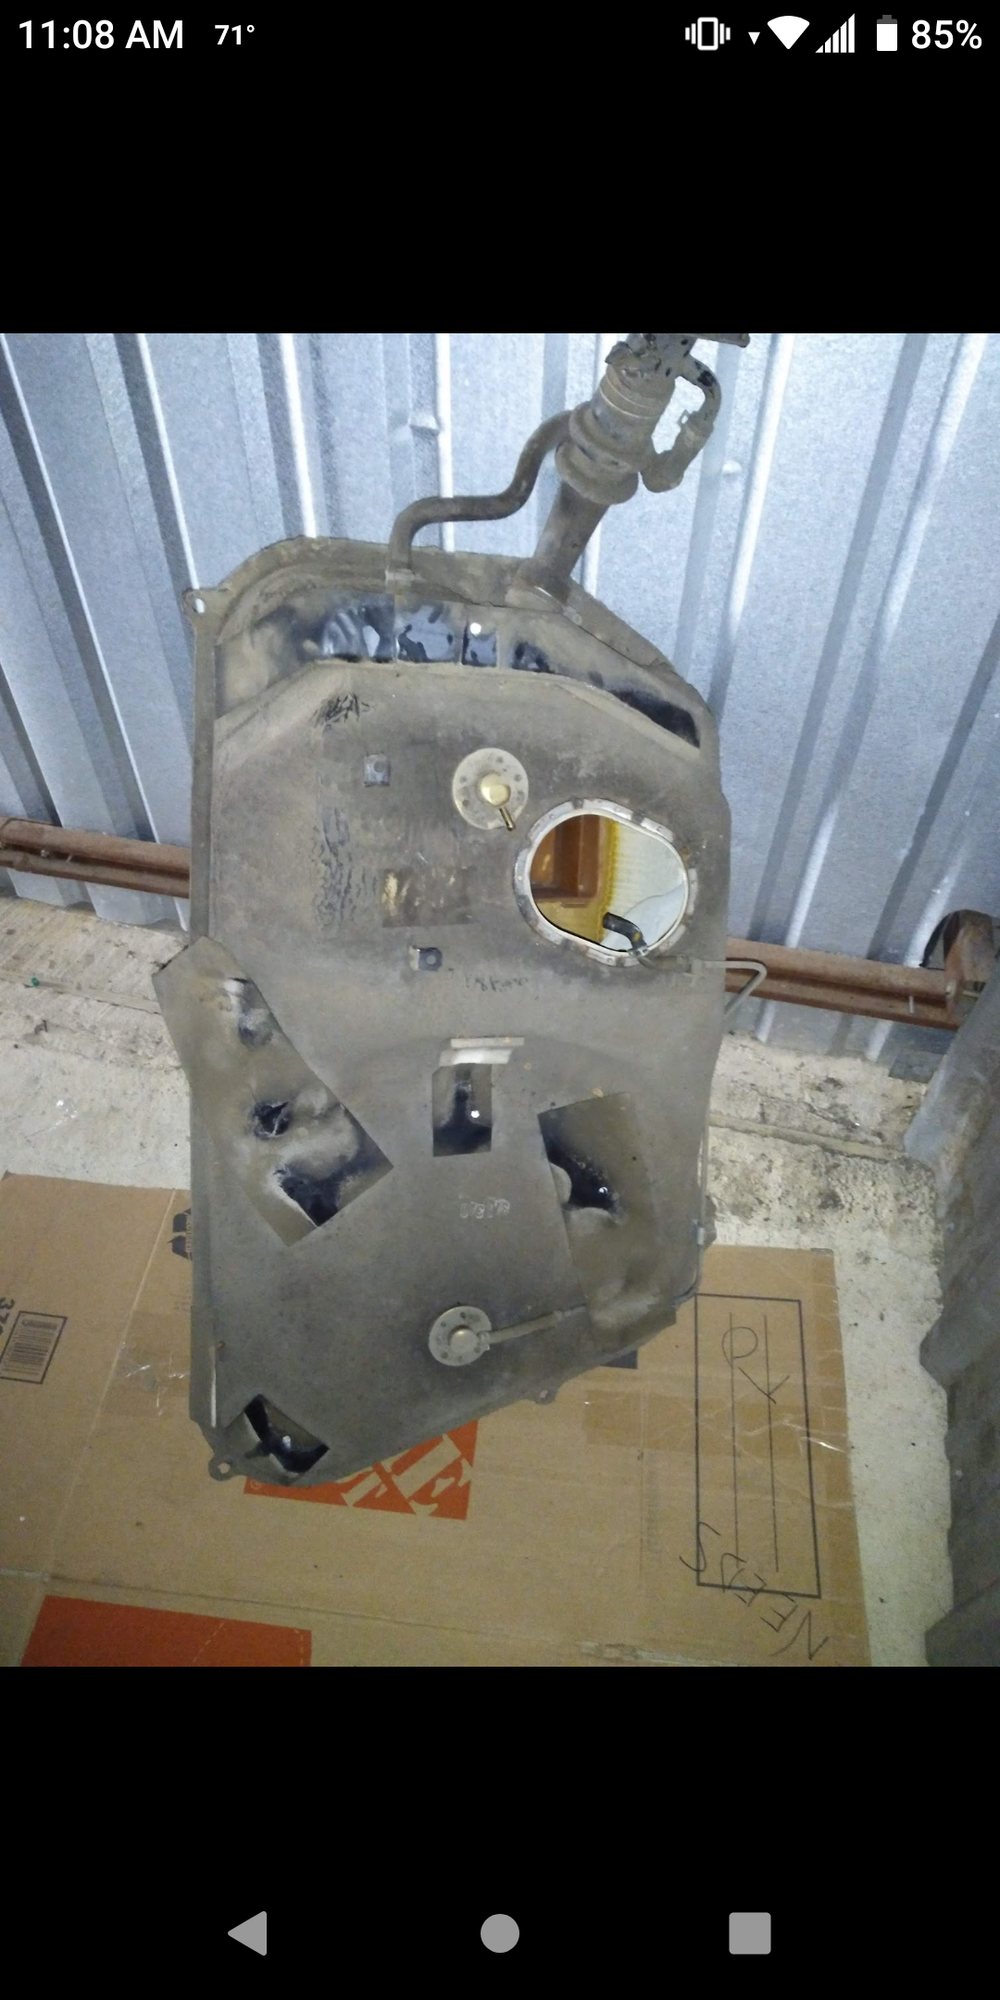 Engine - Intake/Fuel - 1994 RX7 fuel tank - Used - 1993 to 1995 Mazda RX-7 - Houston, TX 77057, United States